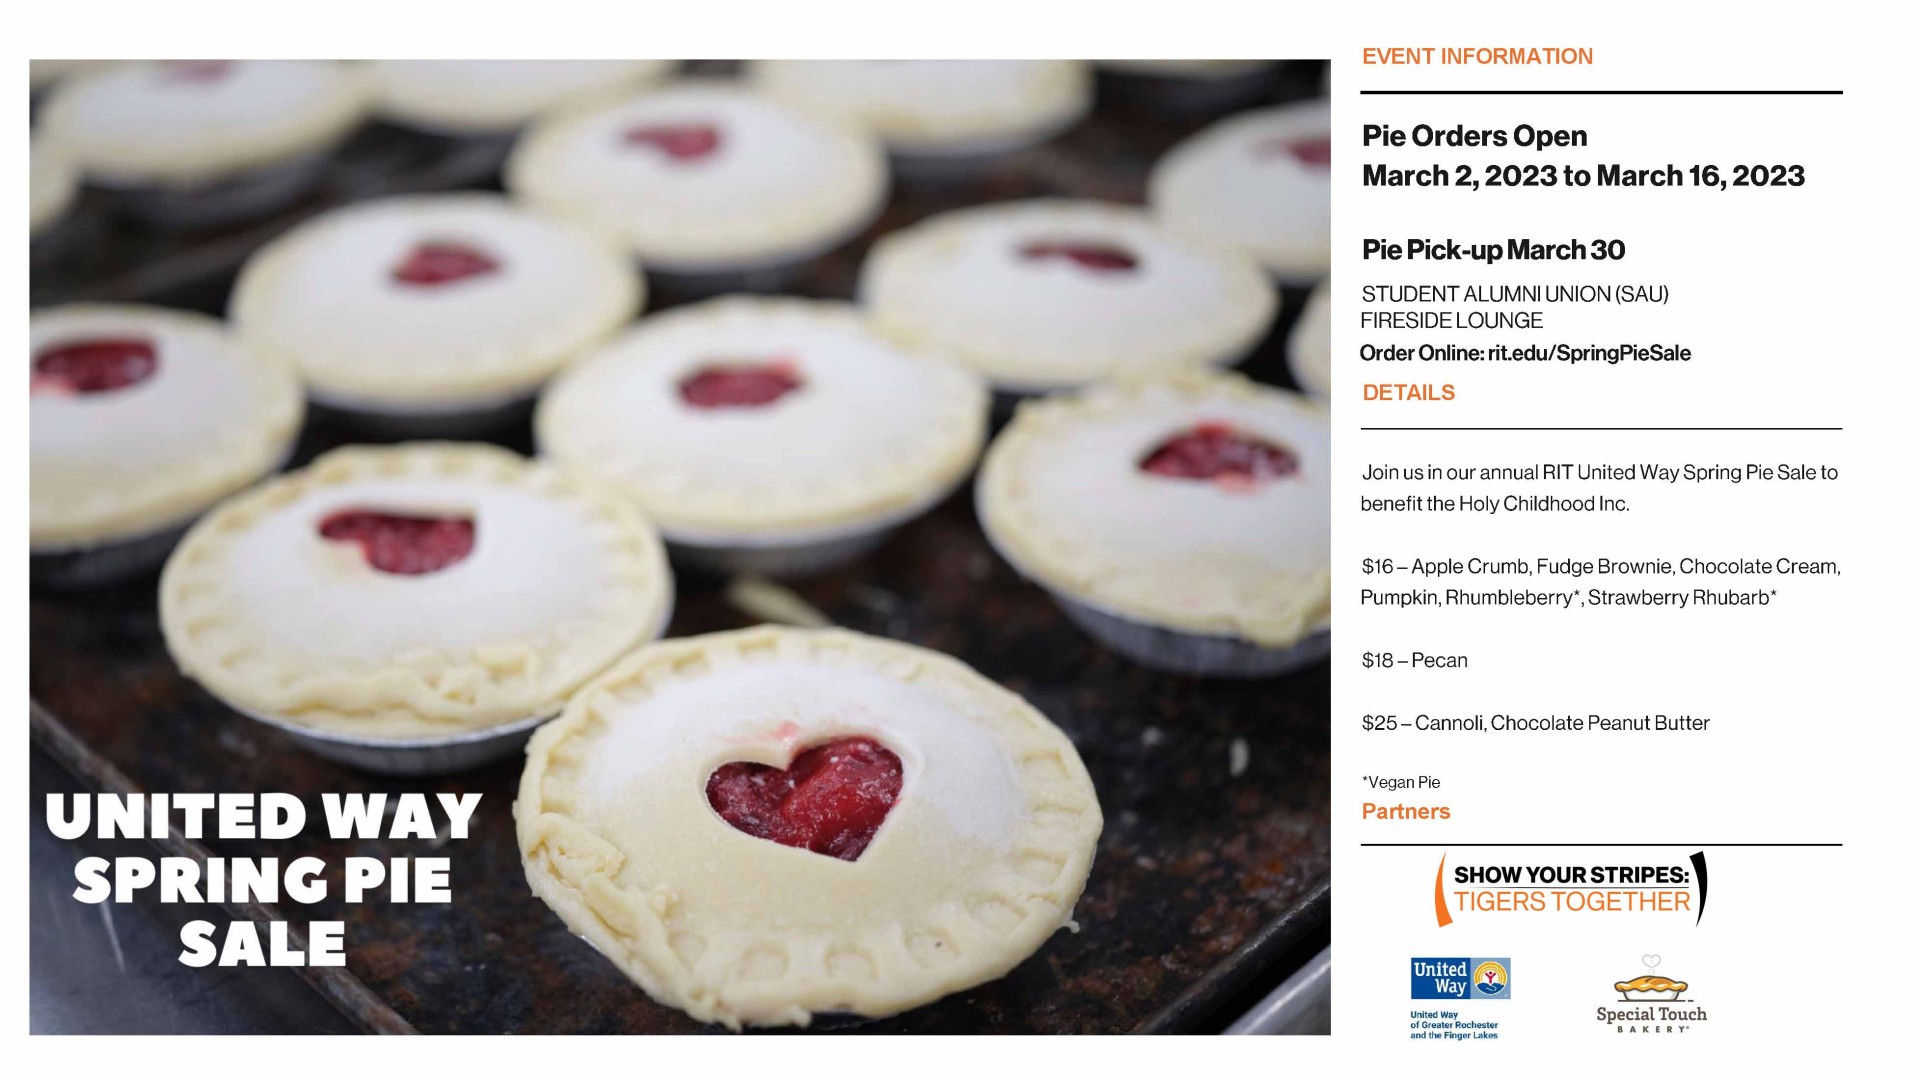 Image of Pies with hearts cut in the top alongside the pie sale flier info. All information from image also listed in event description. 